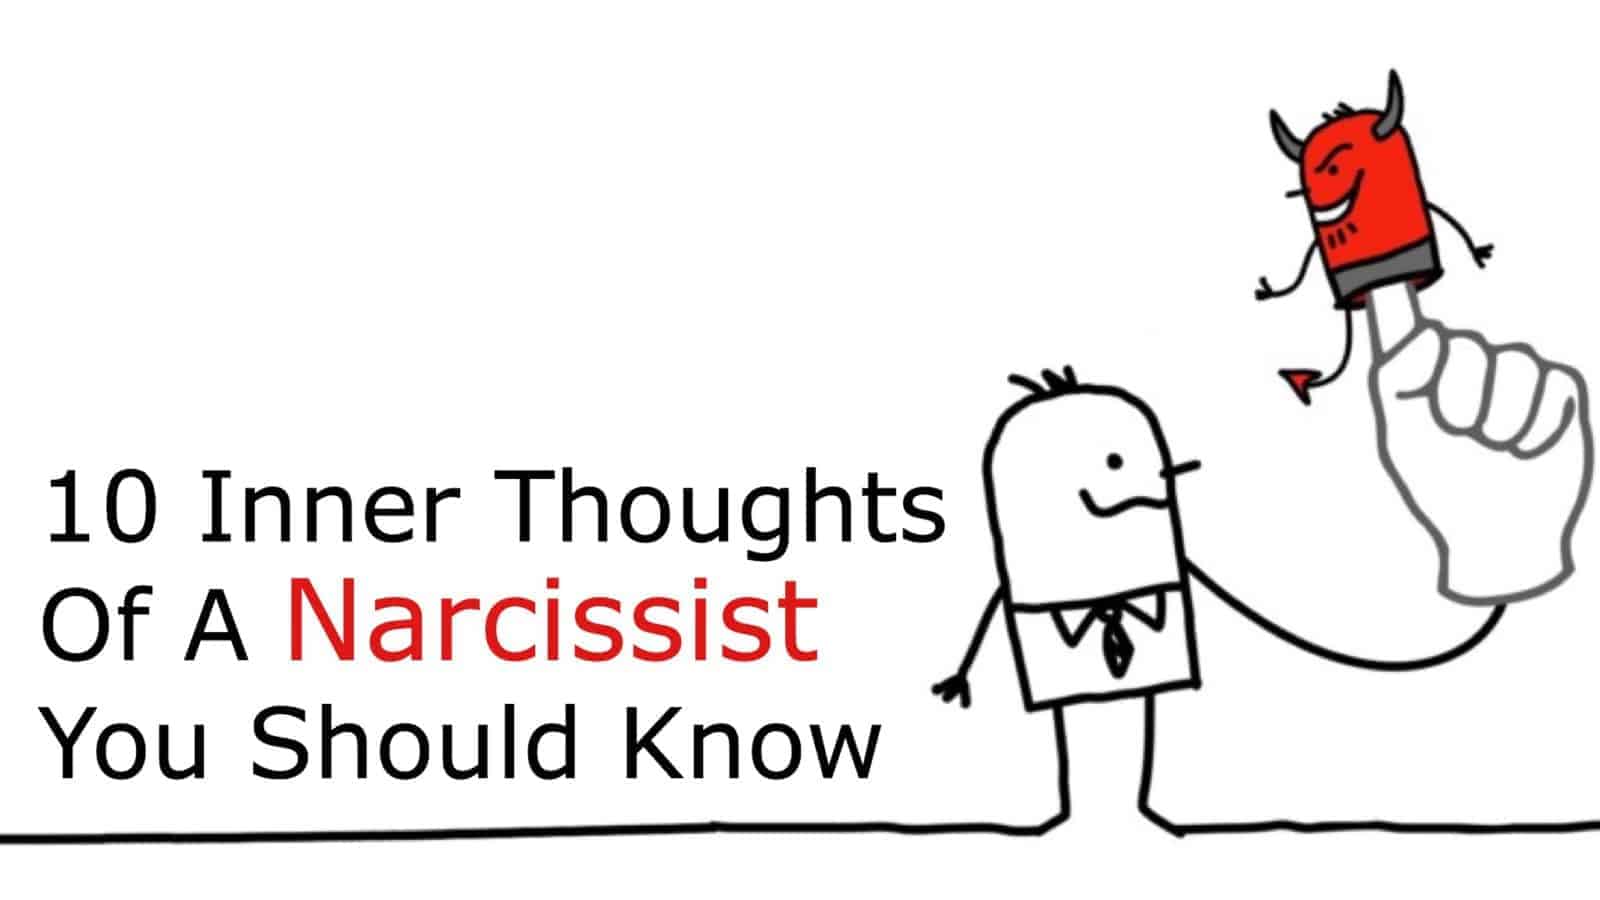 10 Inner Thoughts of A Narcissist You Should Know